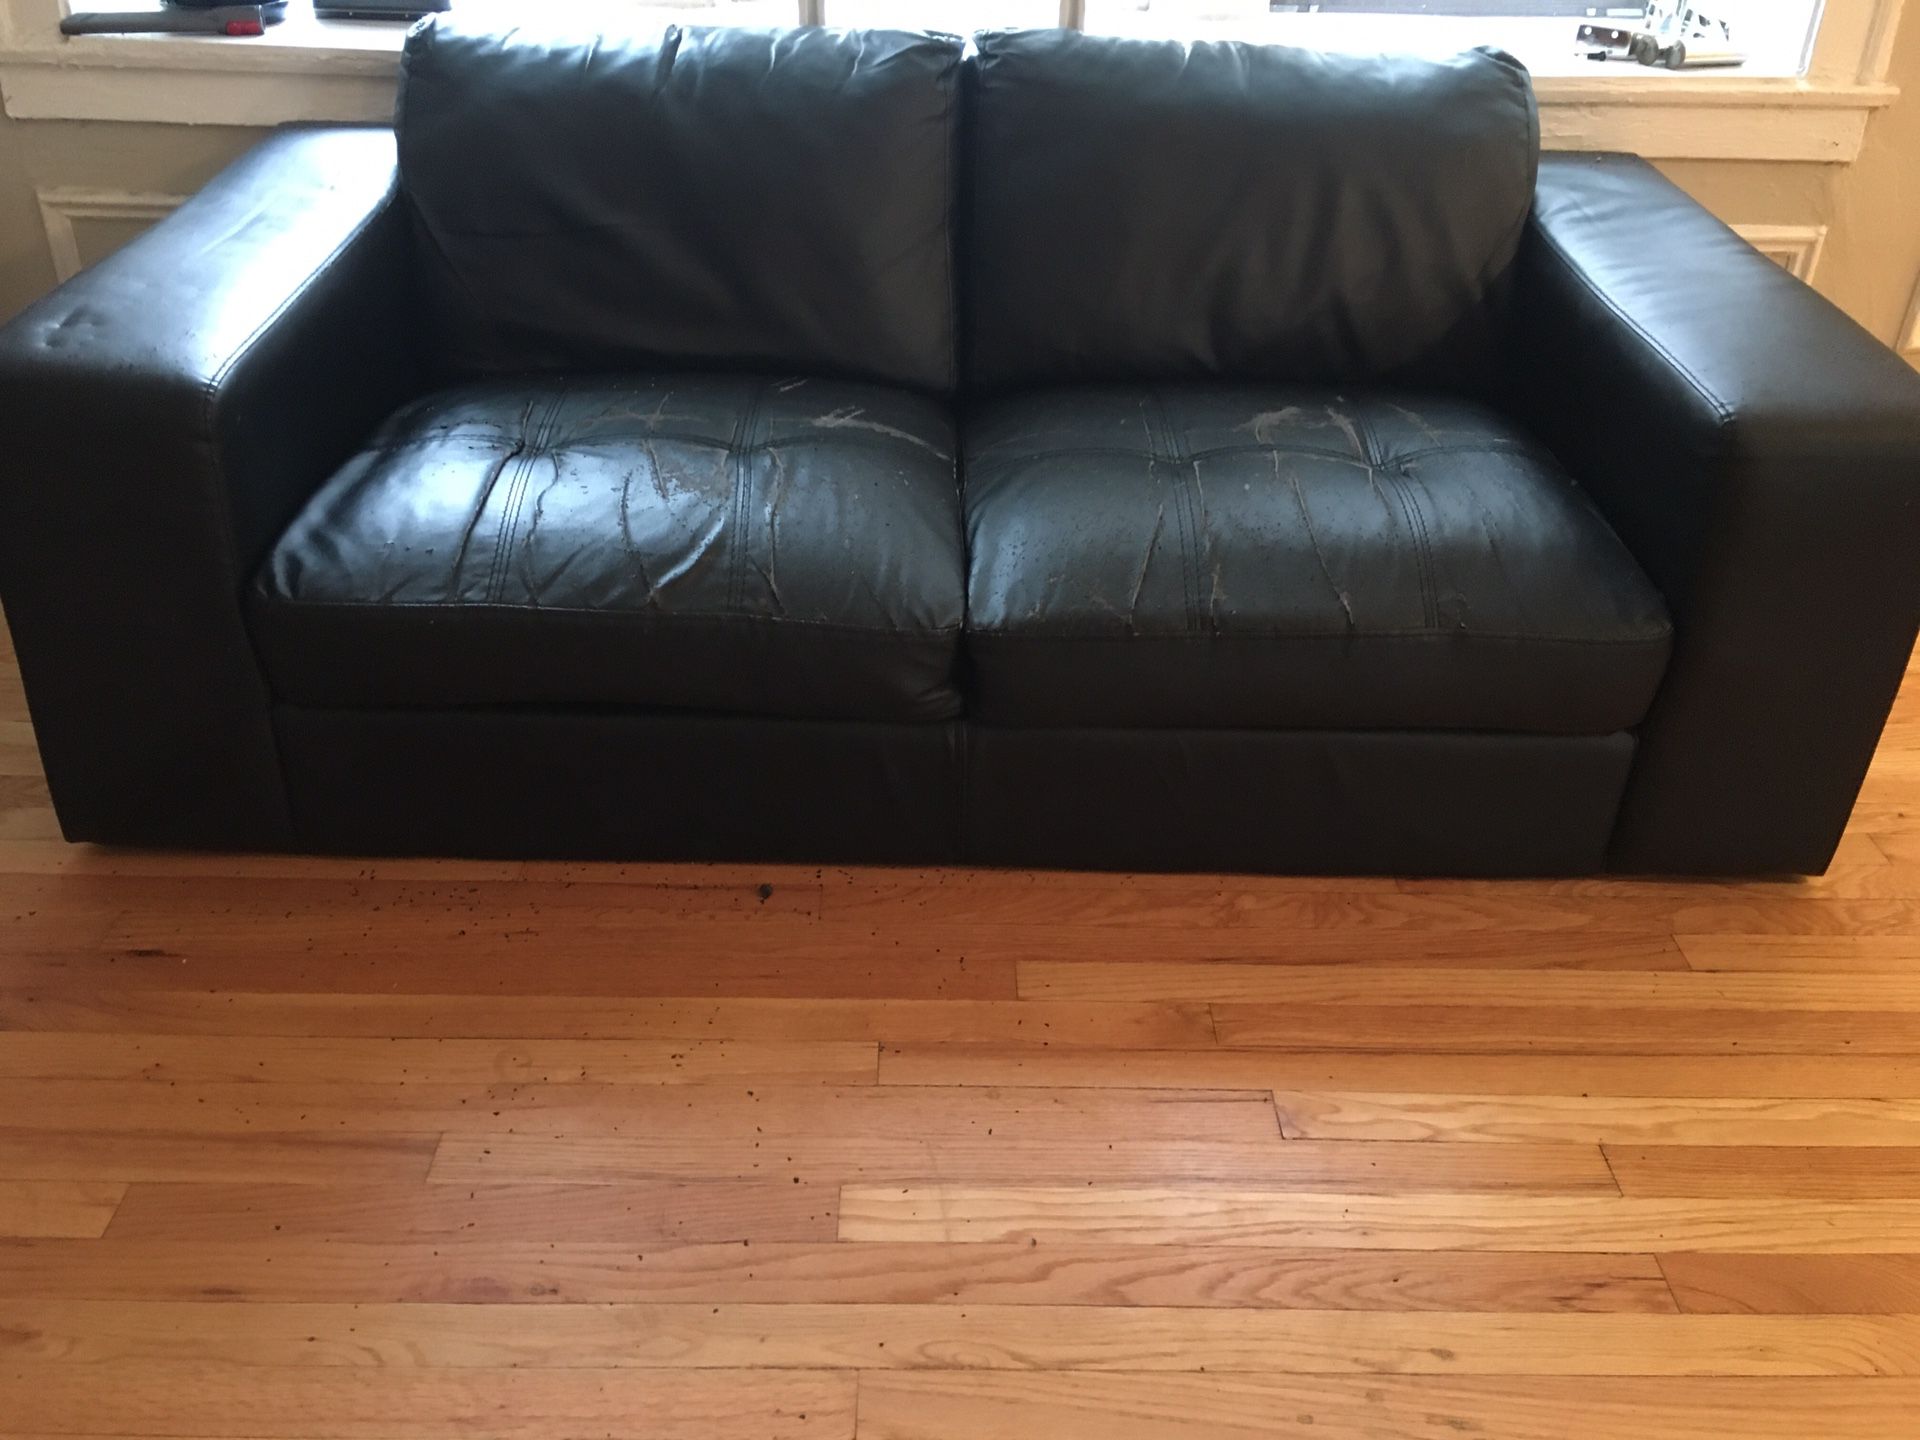 FREE LOVESEAT couch if you bring down from 3rd floor